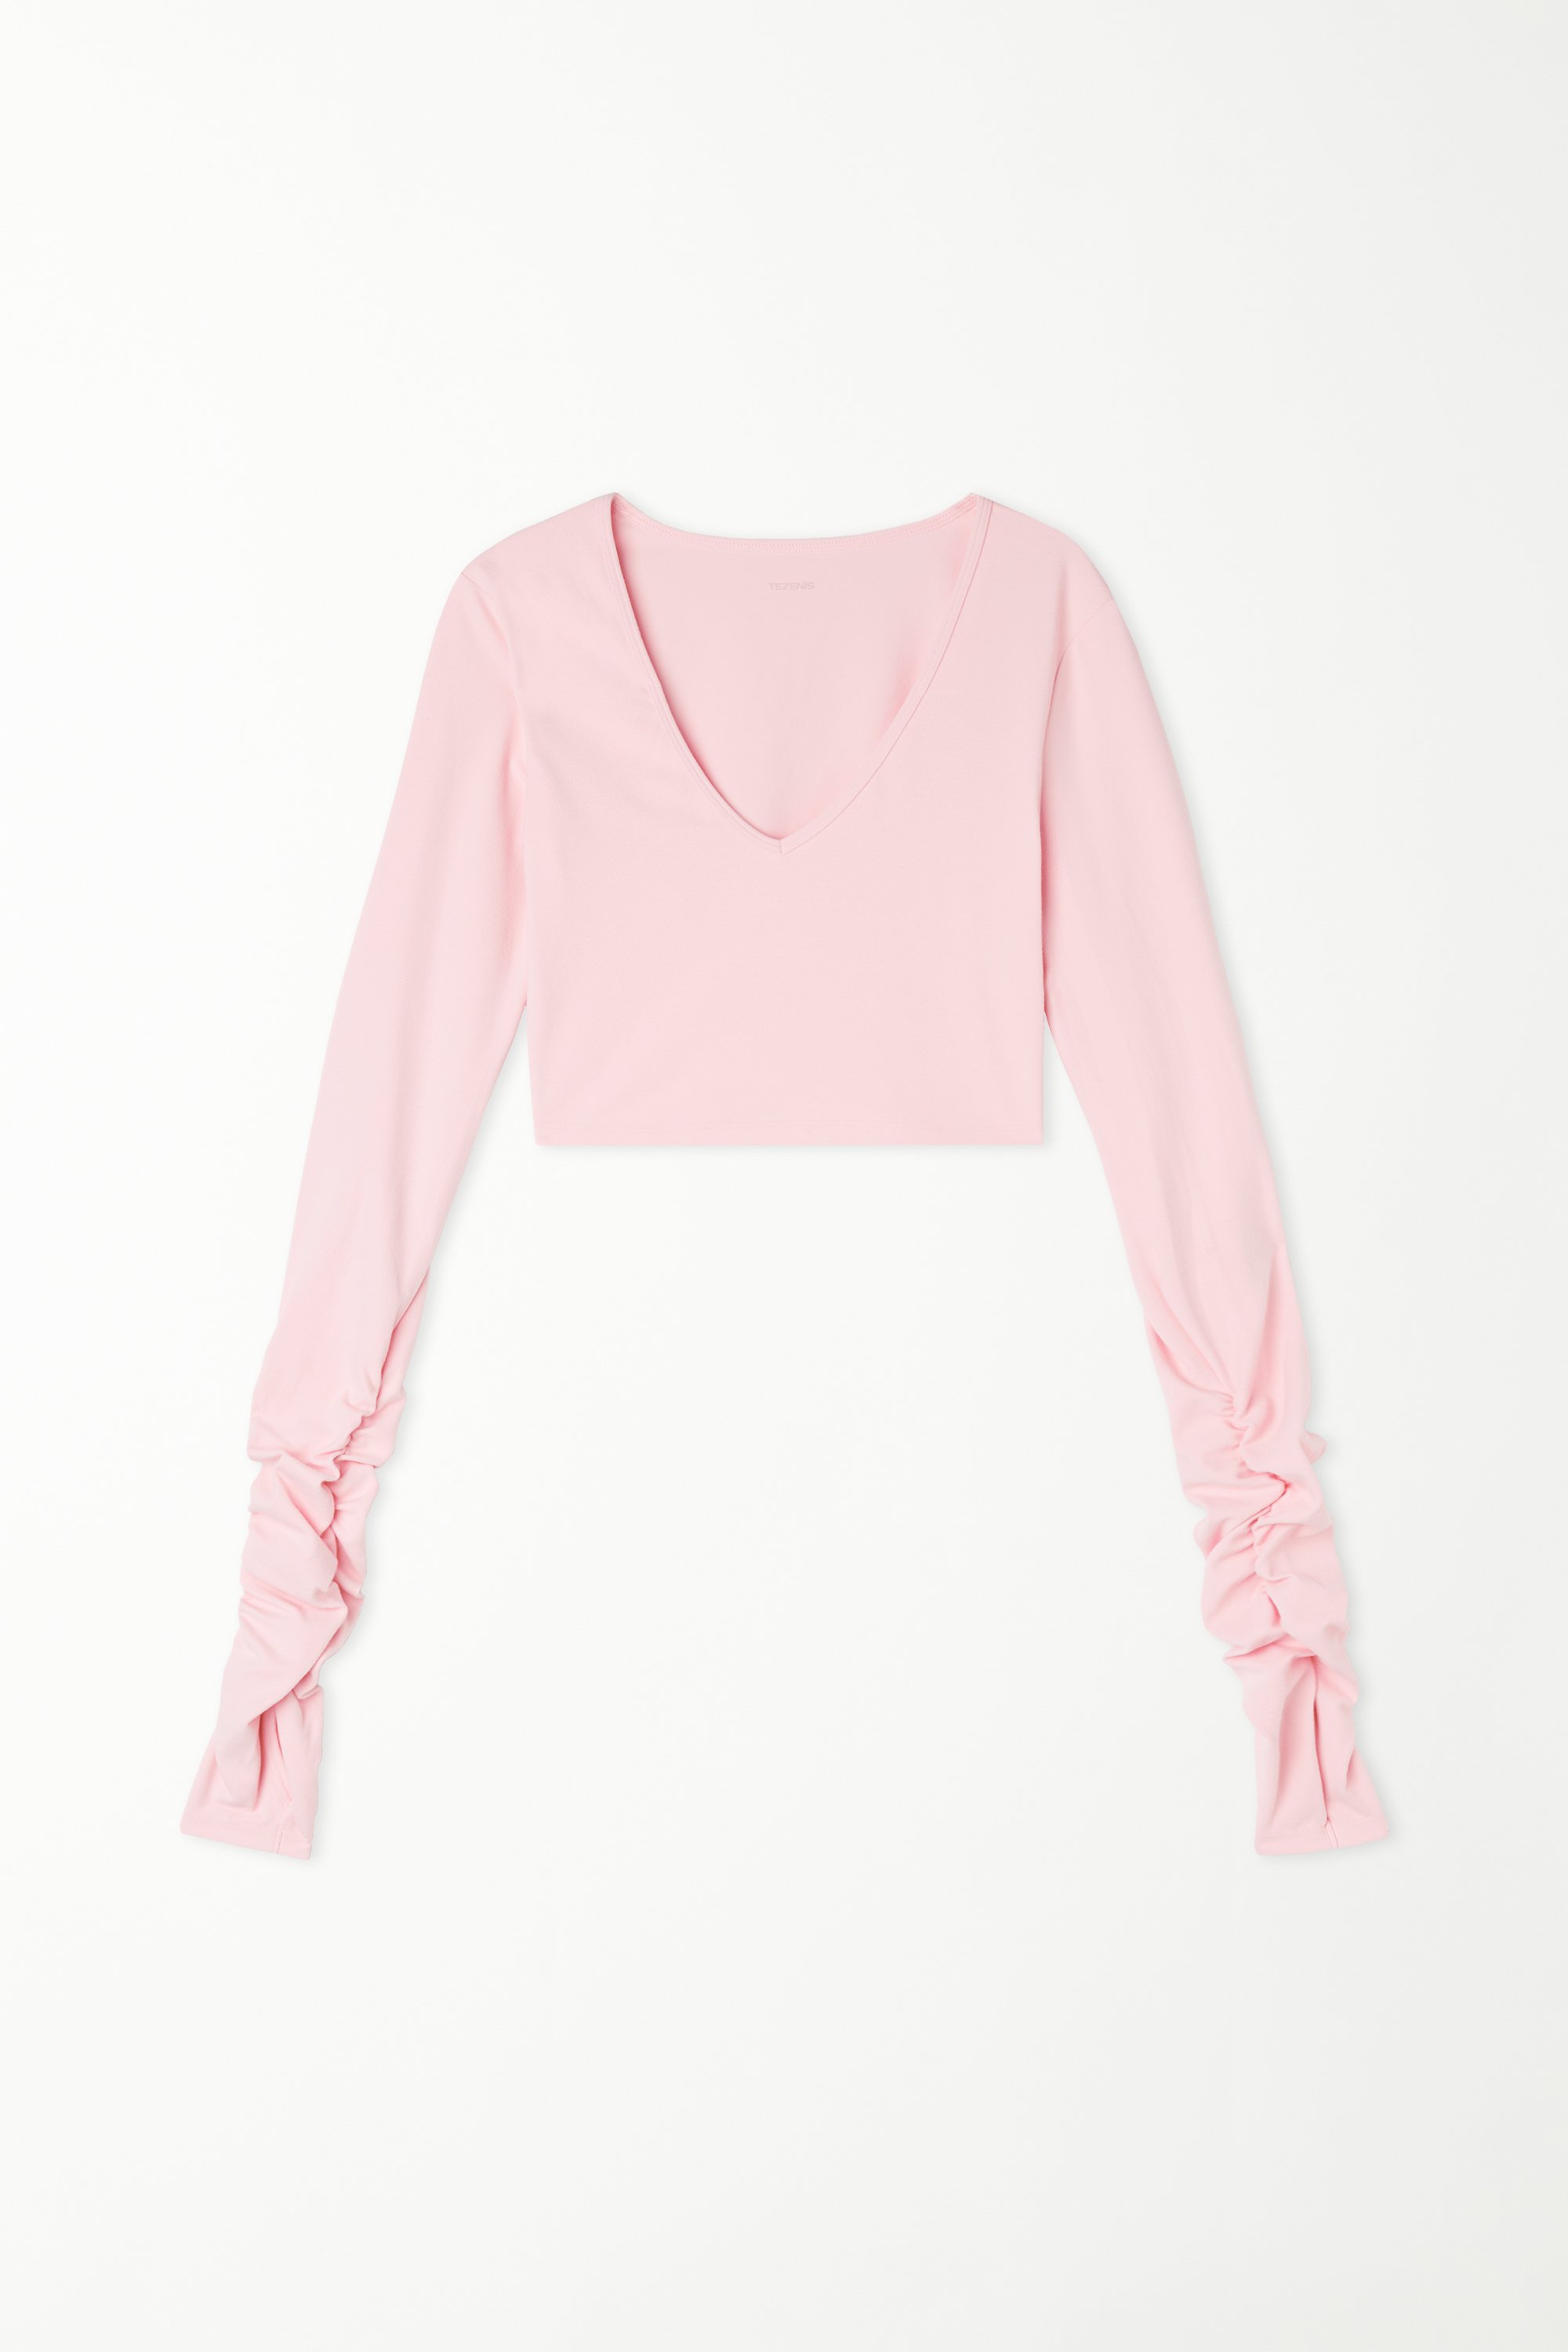 Long Sleeve Scoop Neck Cropped Top in Soft Microfiber